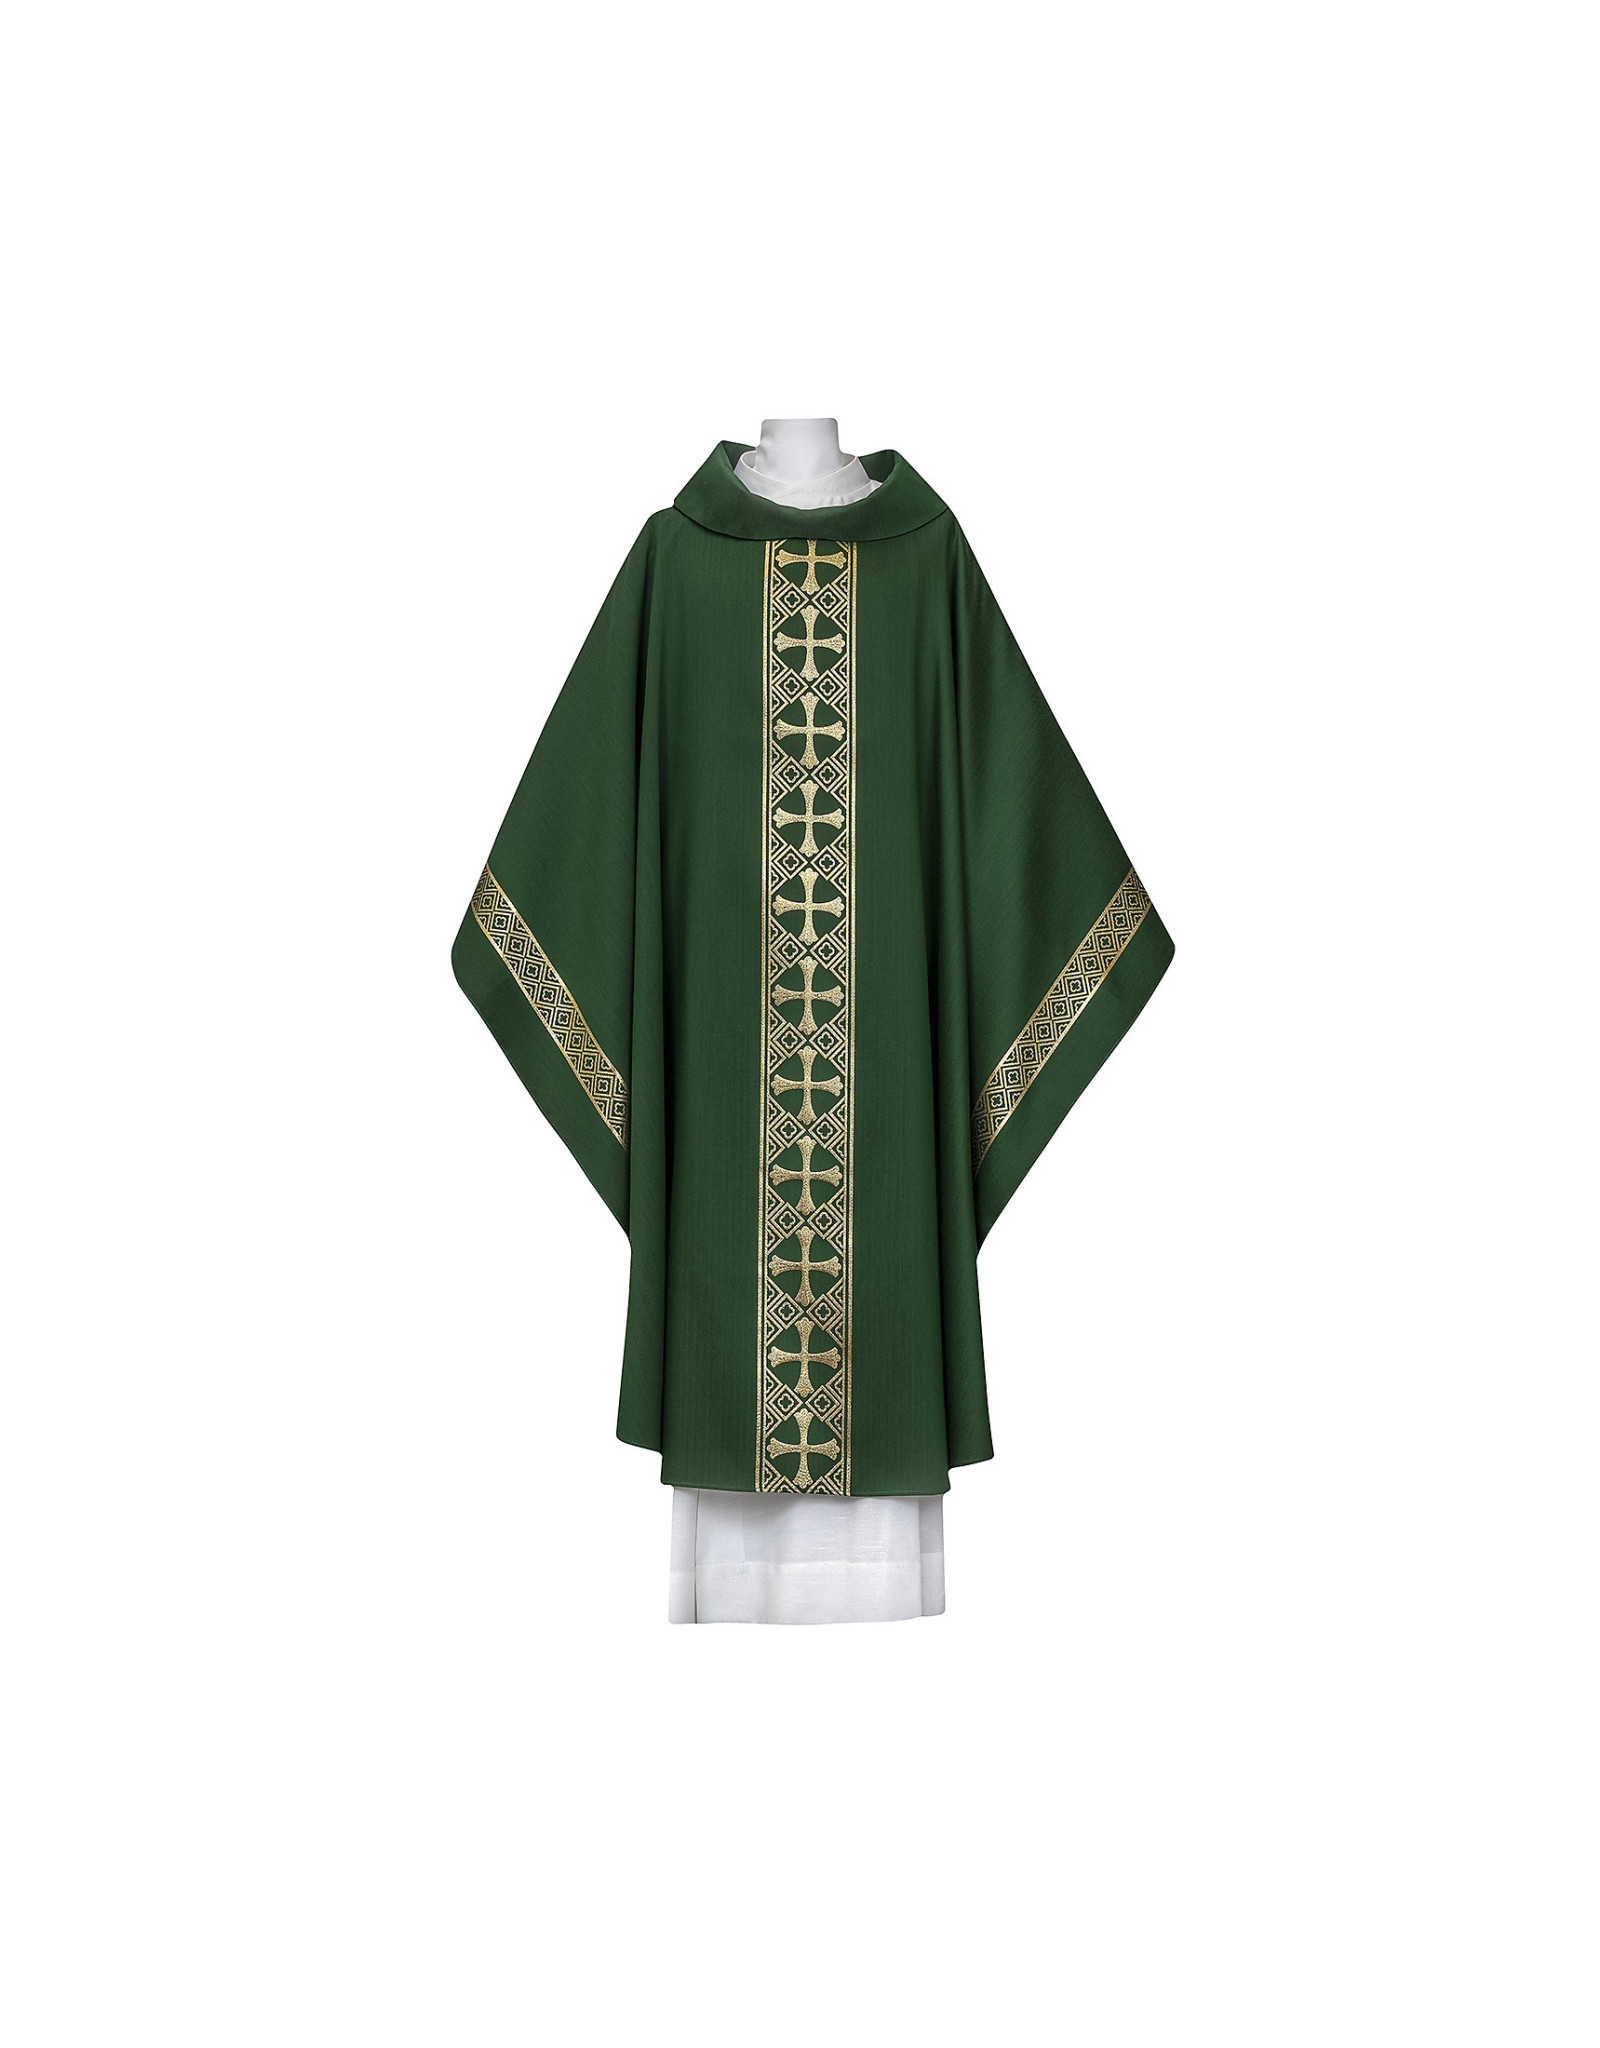 Chasuble 1371 Series Cowl Neck